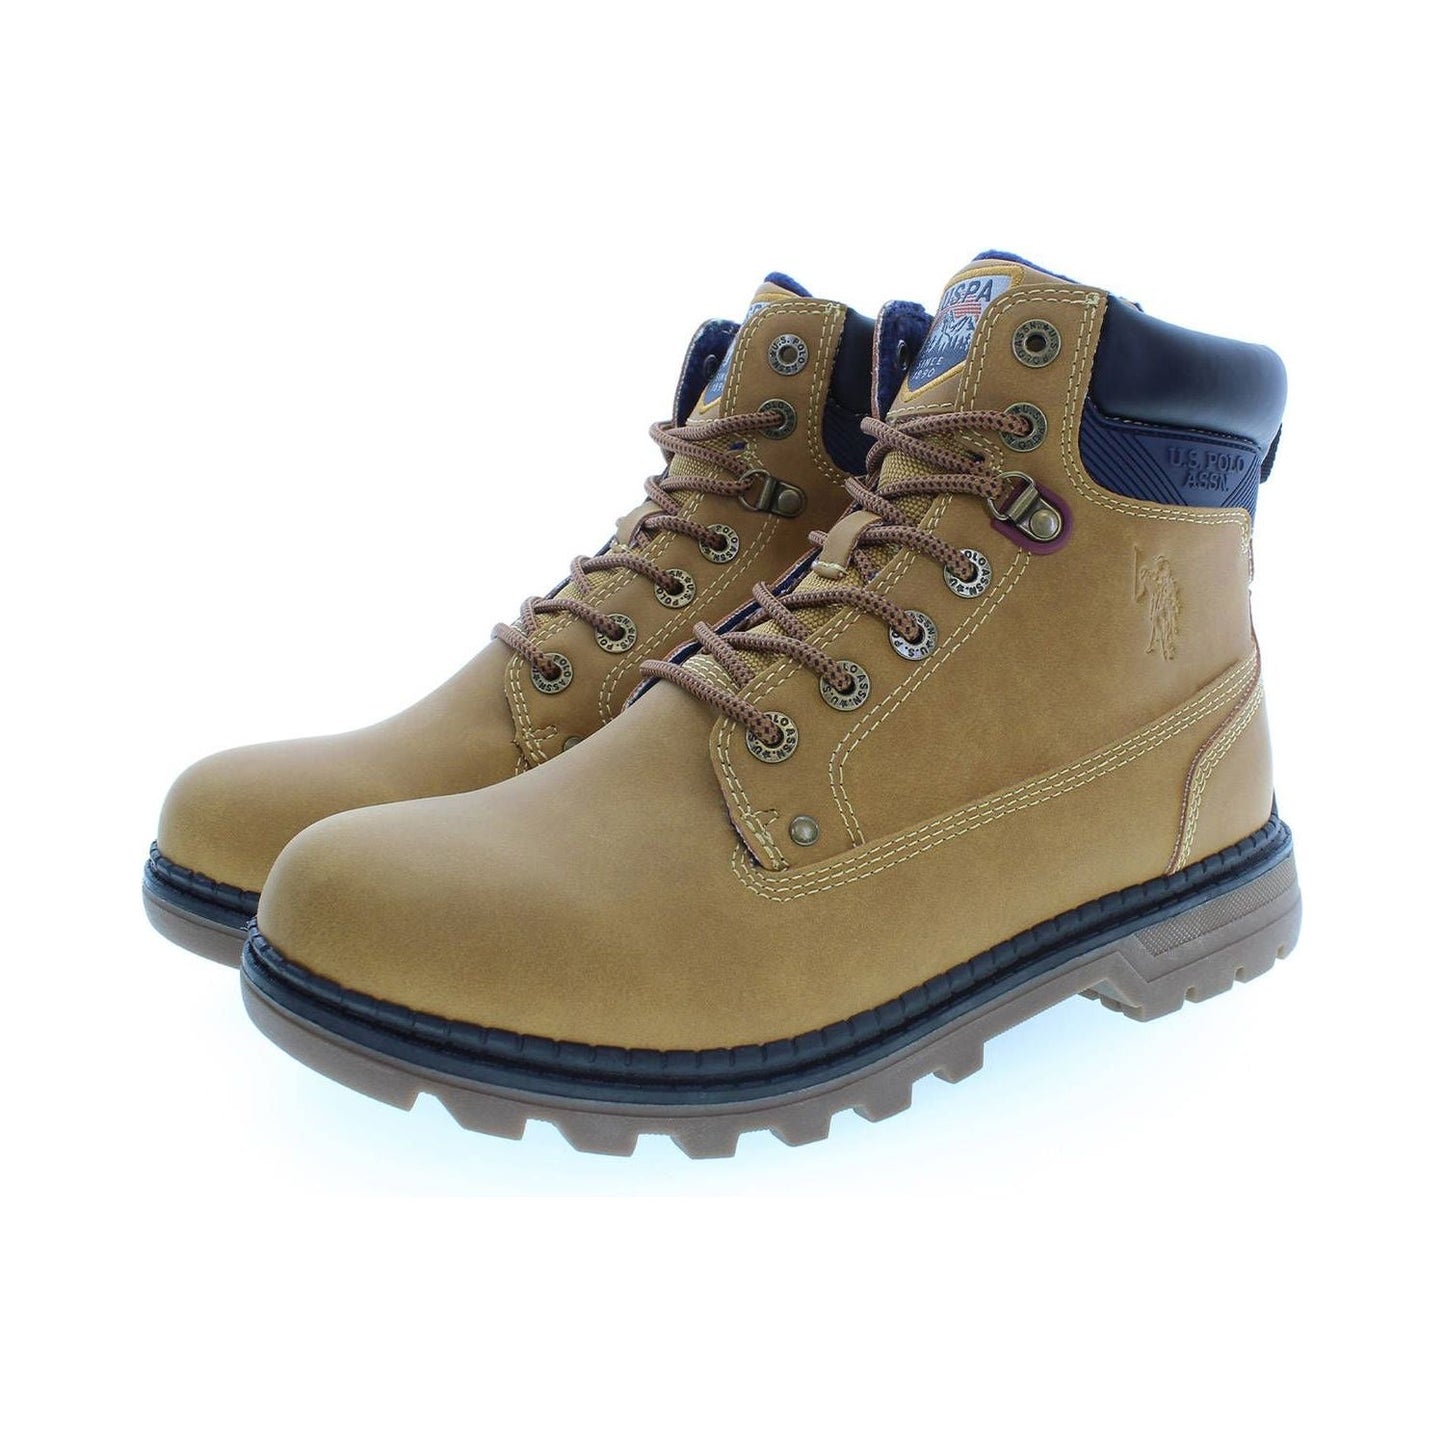 U.S. POLO ASSN. Beige High-Top Boots with Logo Detailing beige-high-top-boots-with-logo-detailing